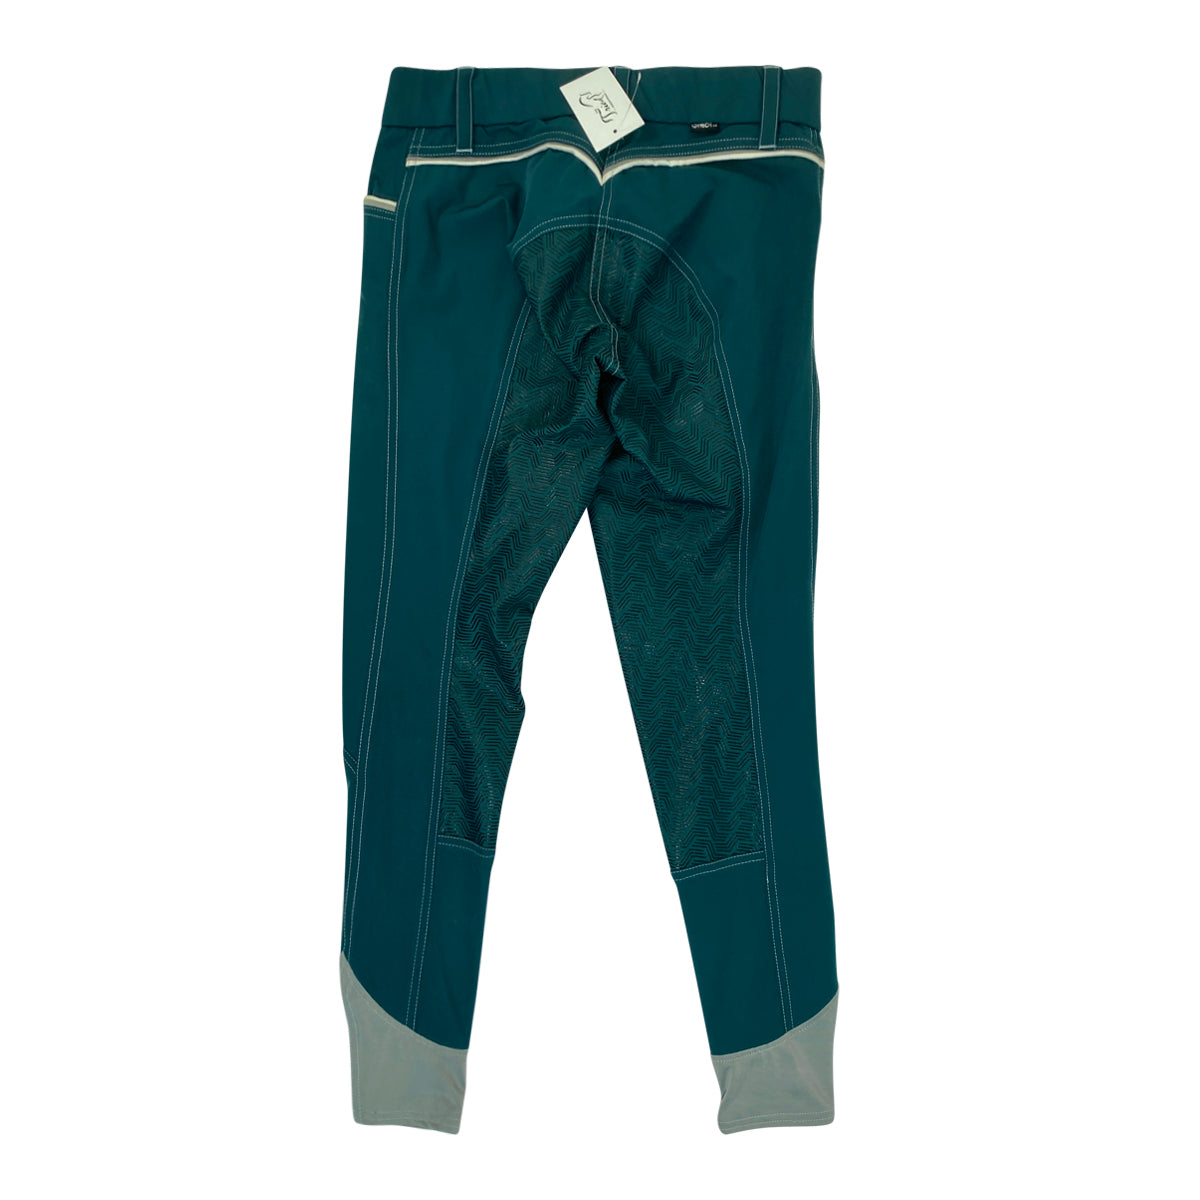 Ghodho 'Adena' Full Seat Breeches in Teal